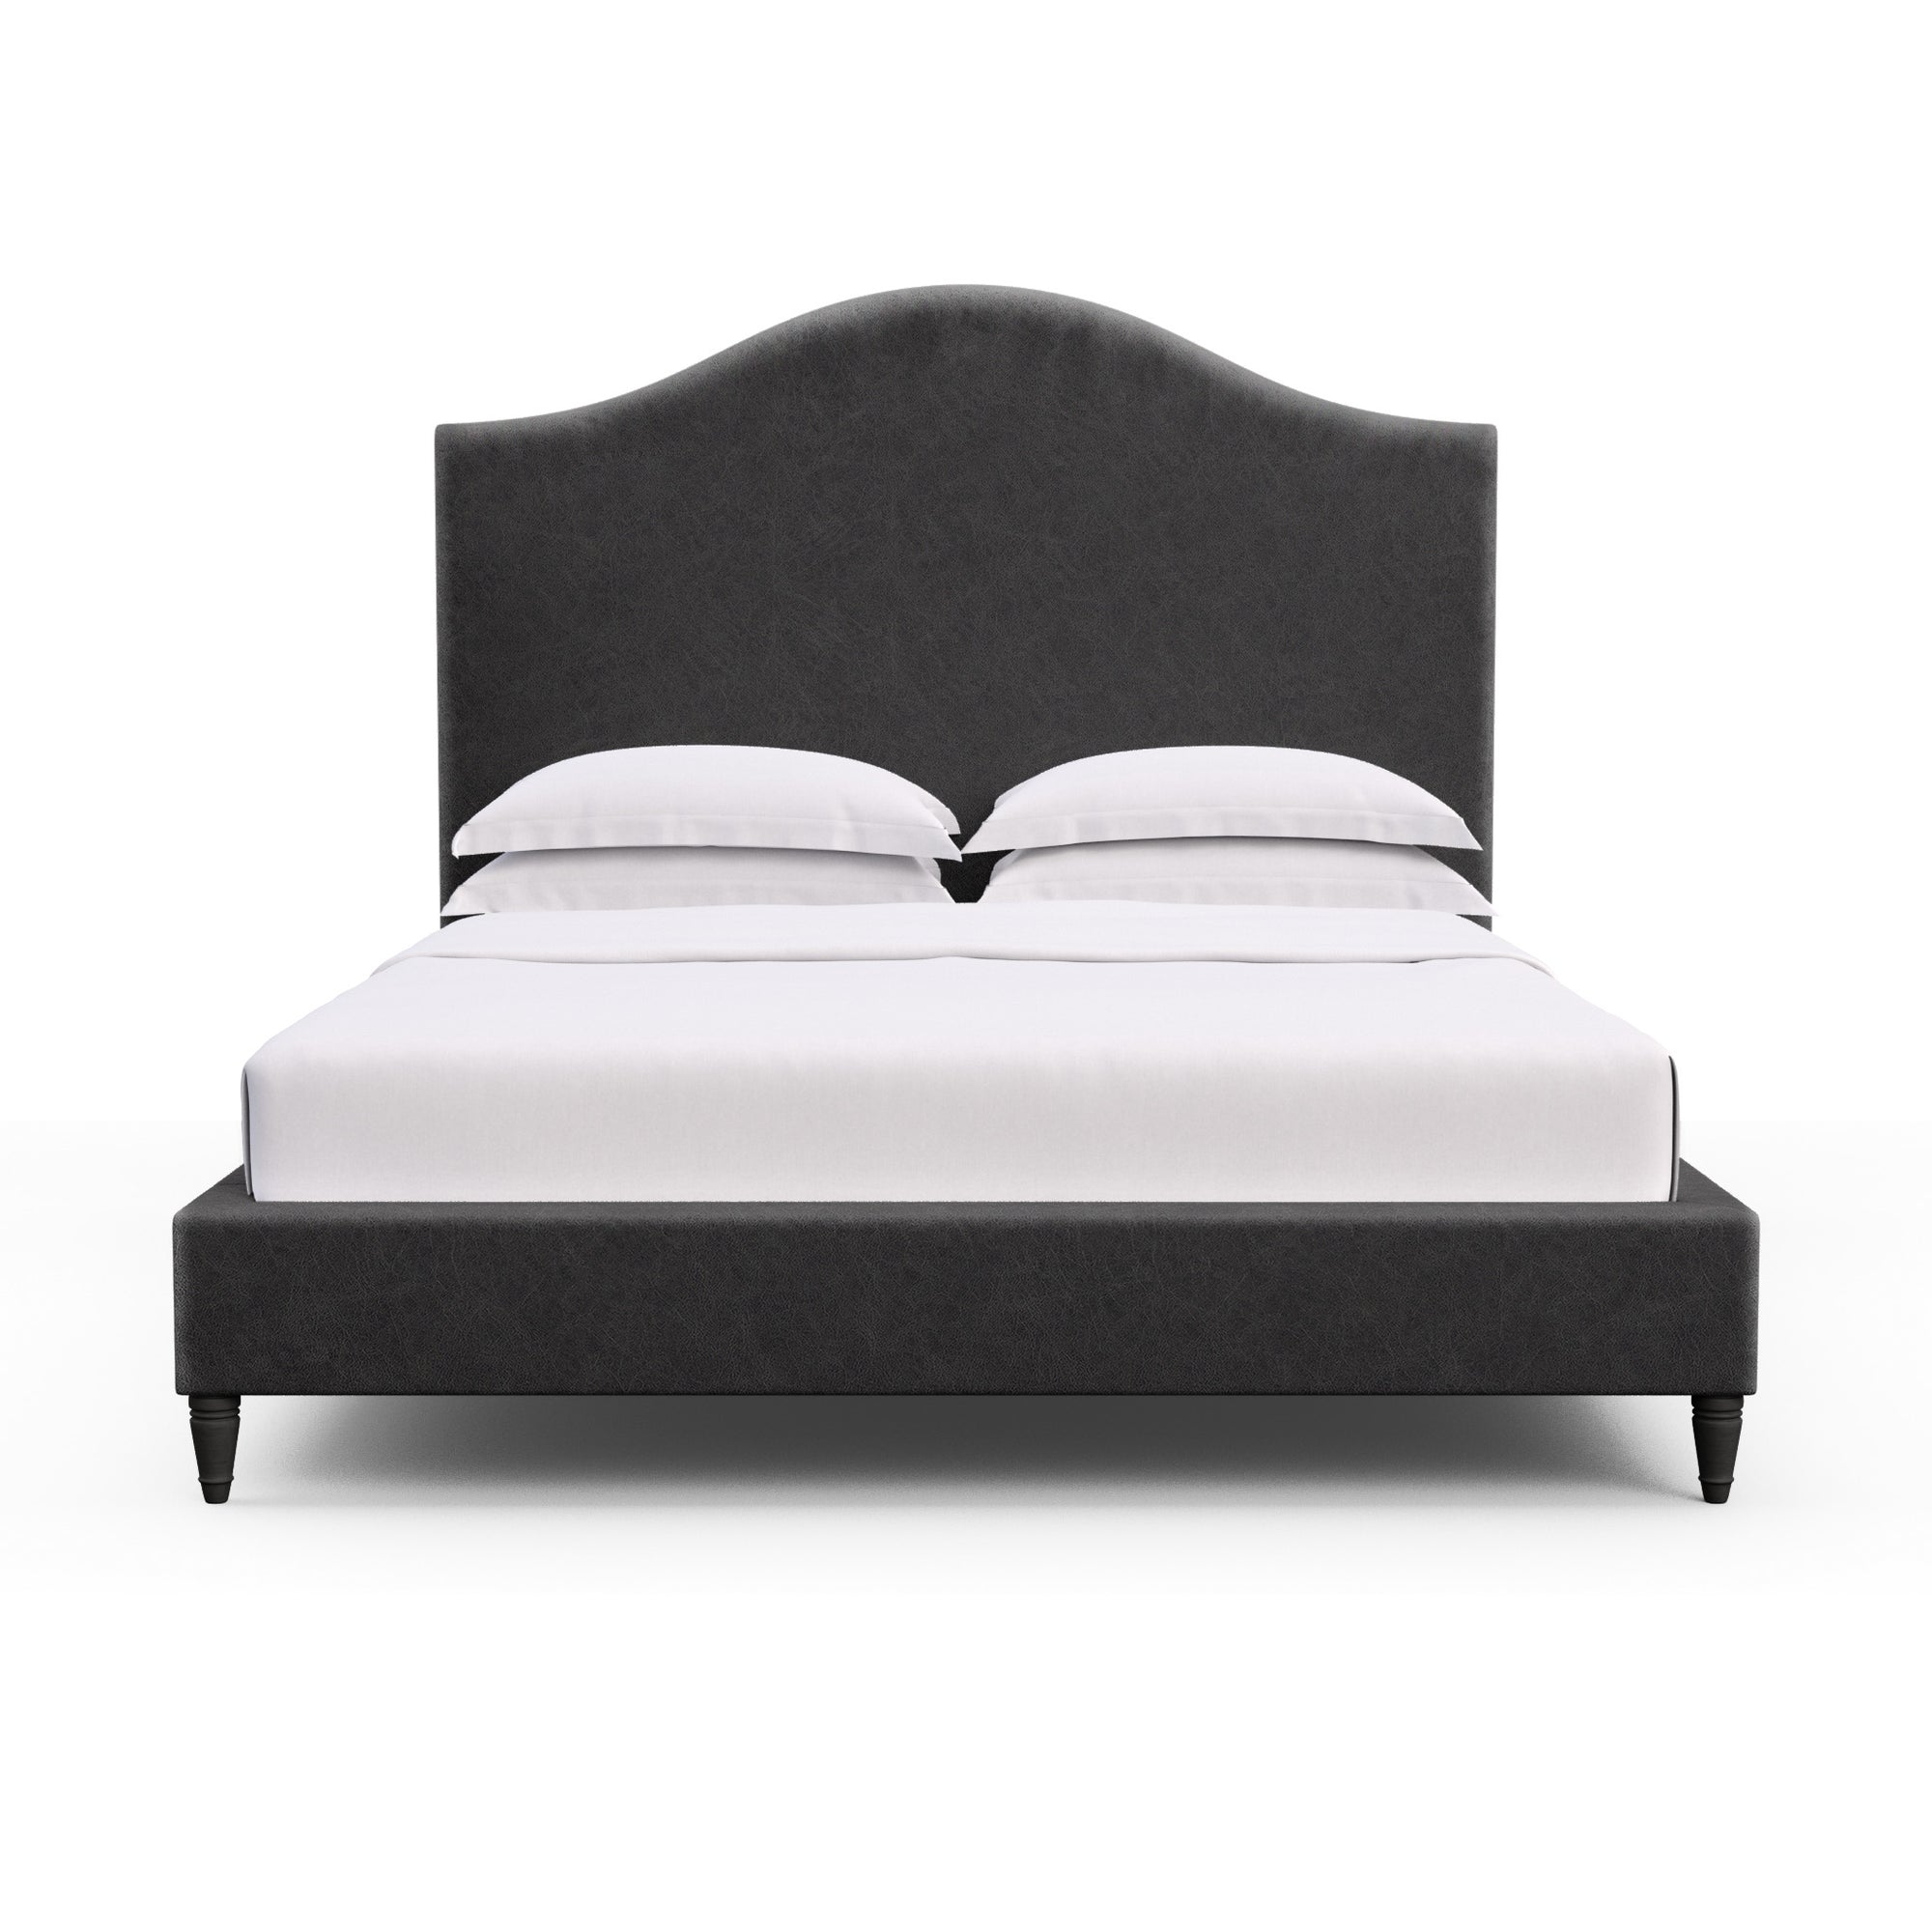 Montague Arched Panel Bed - Black Jack Distressed Leather